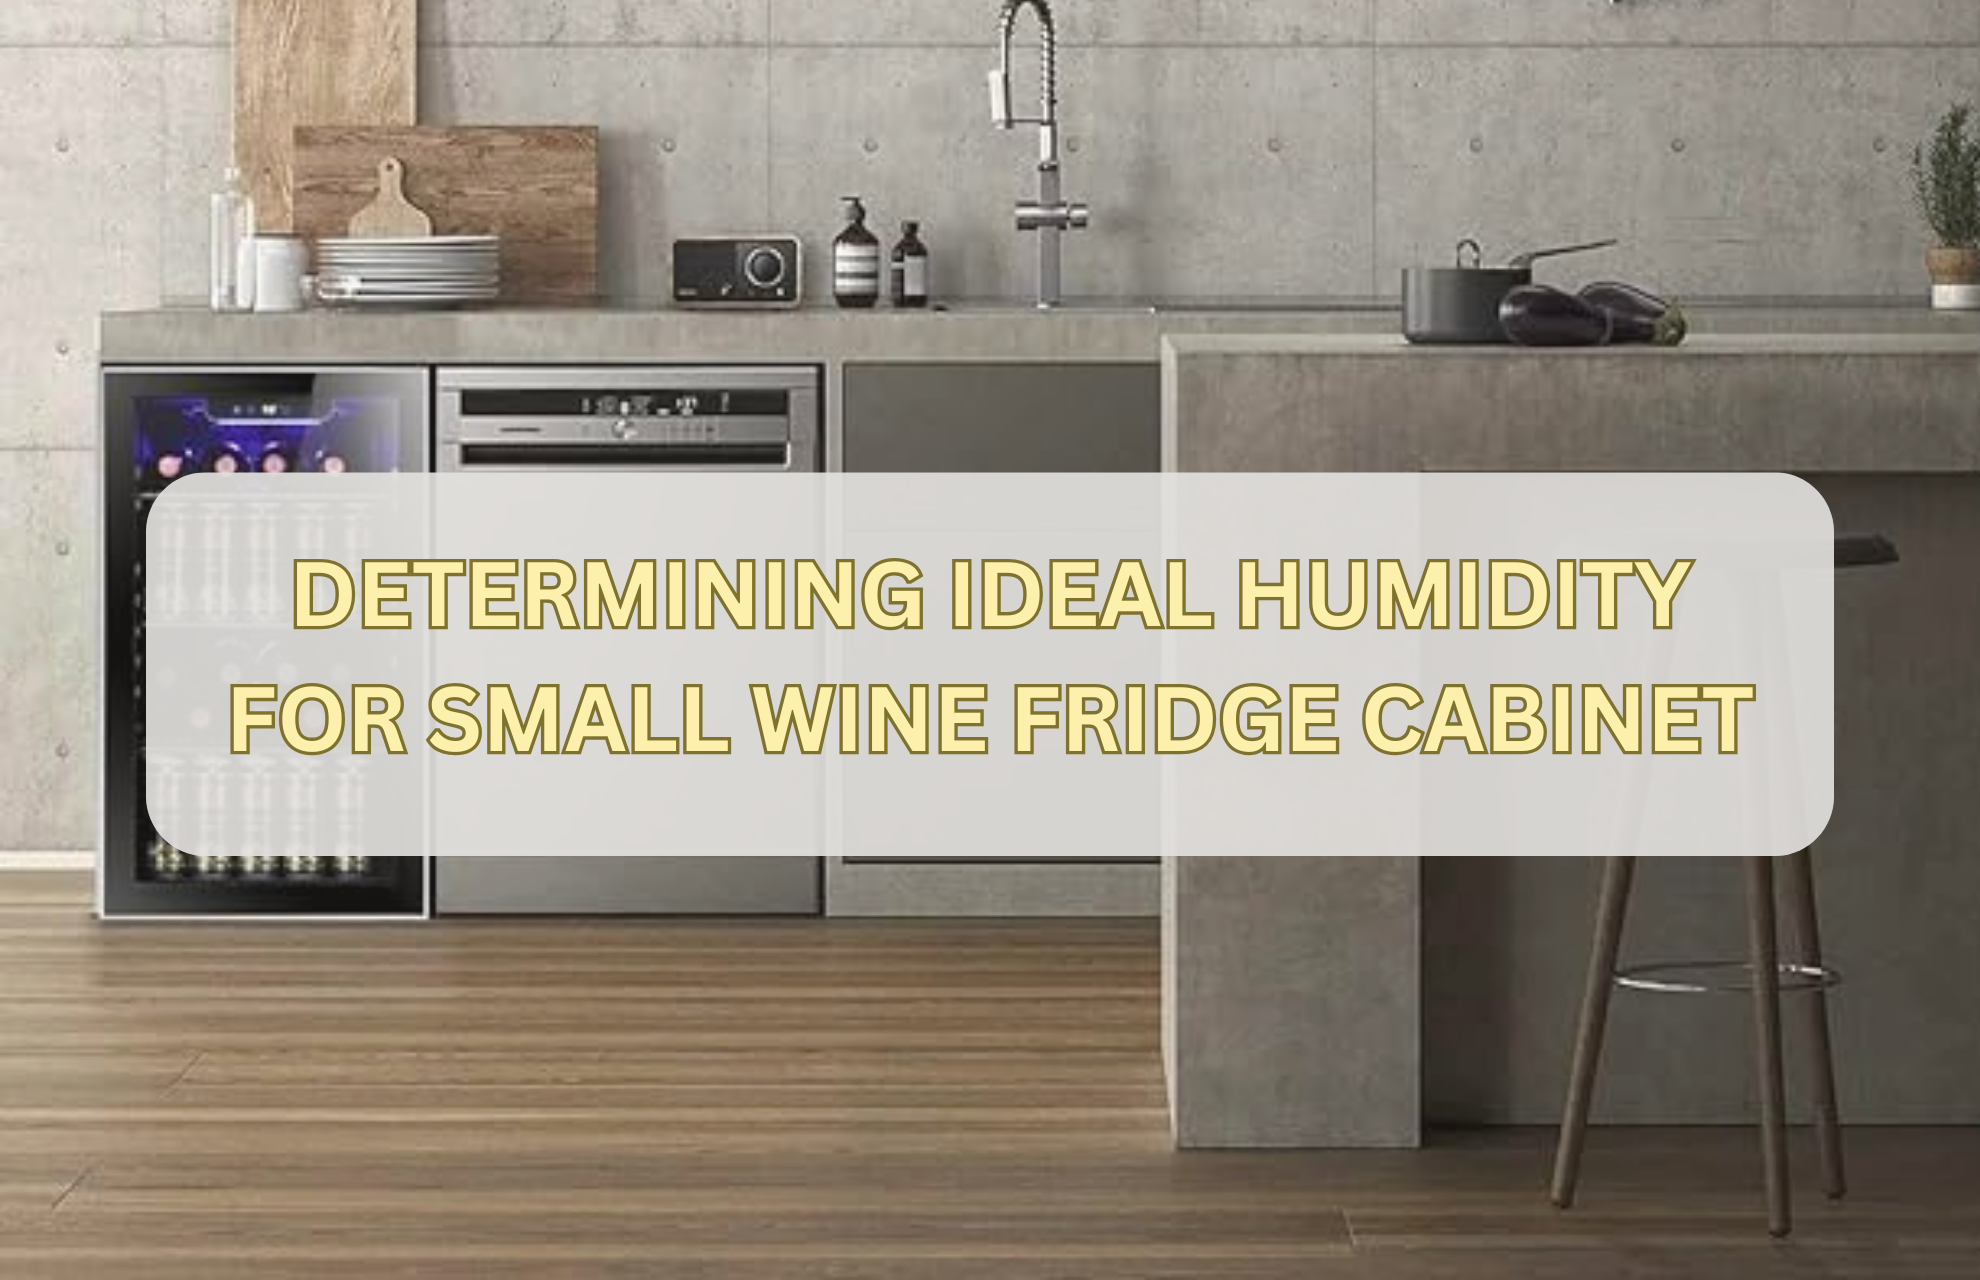 DETERMINING IDEAL HUMIDITY FOR SMALL WINE FRIDGE CABINET